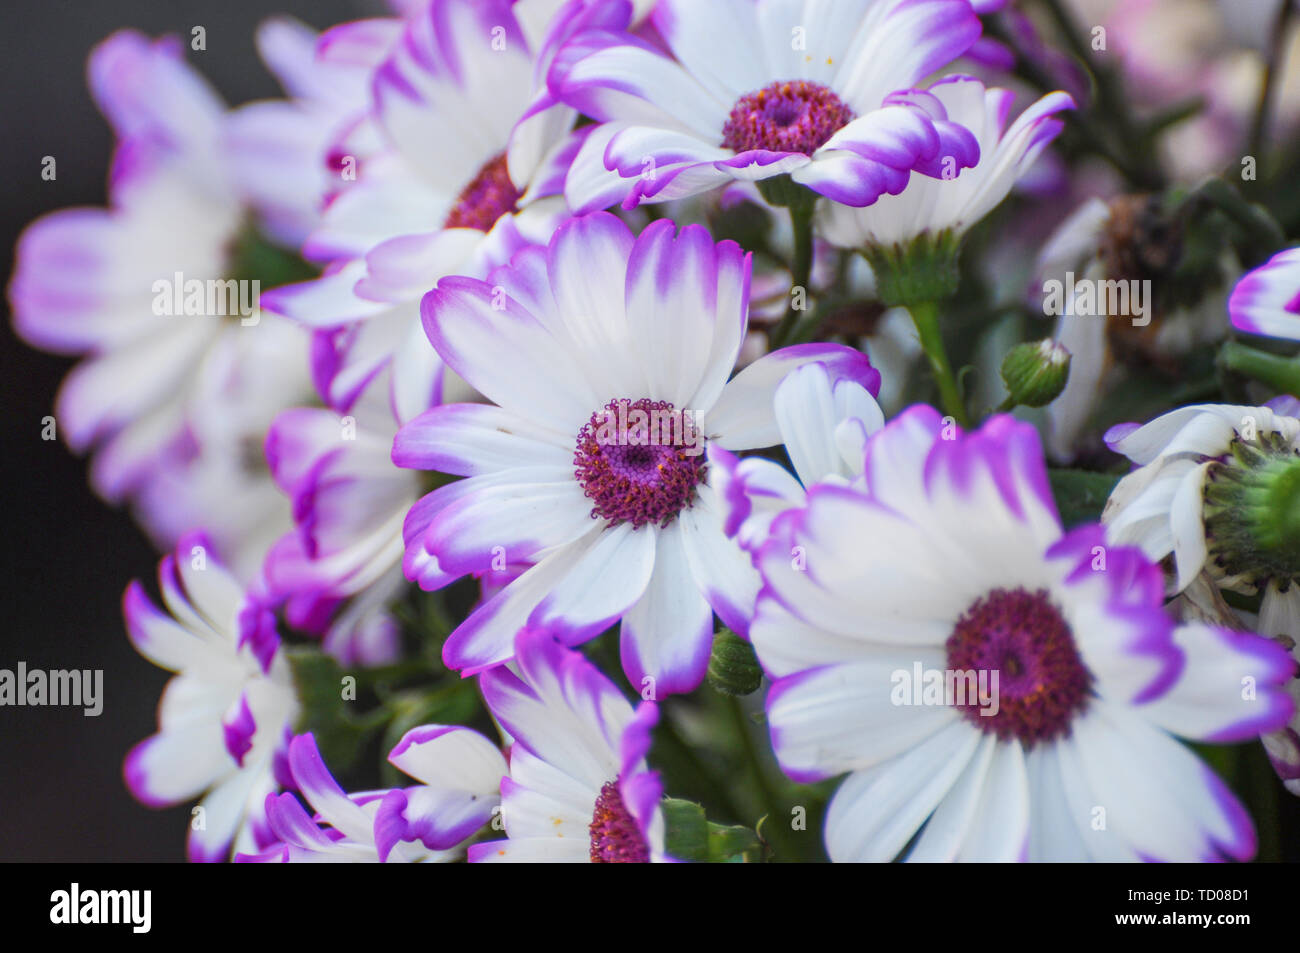 Flowers in bloom in late spring and early summer. Stock Photo